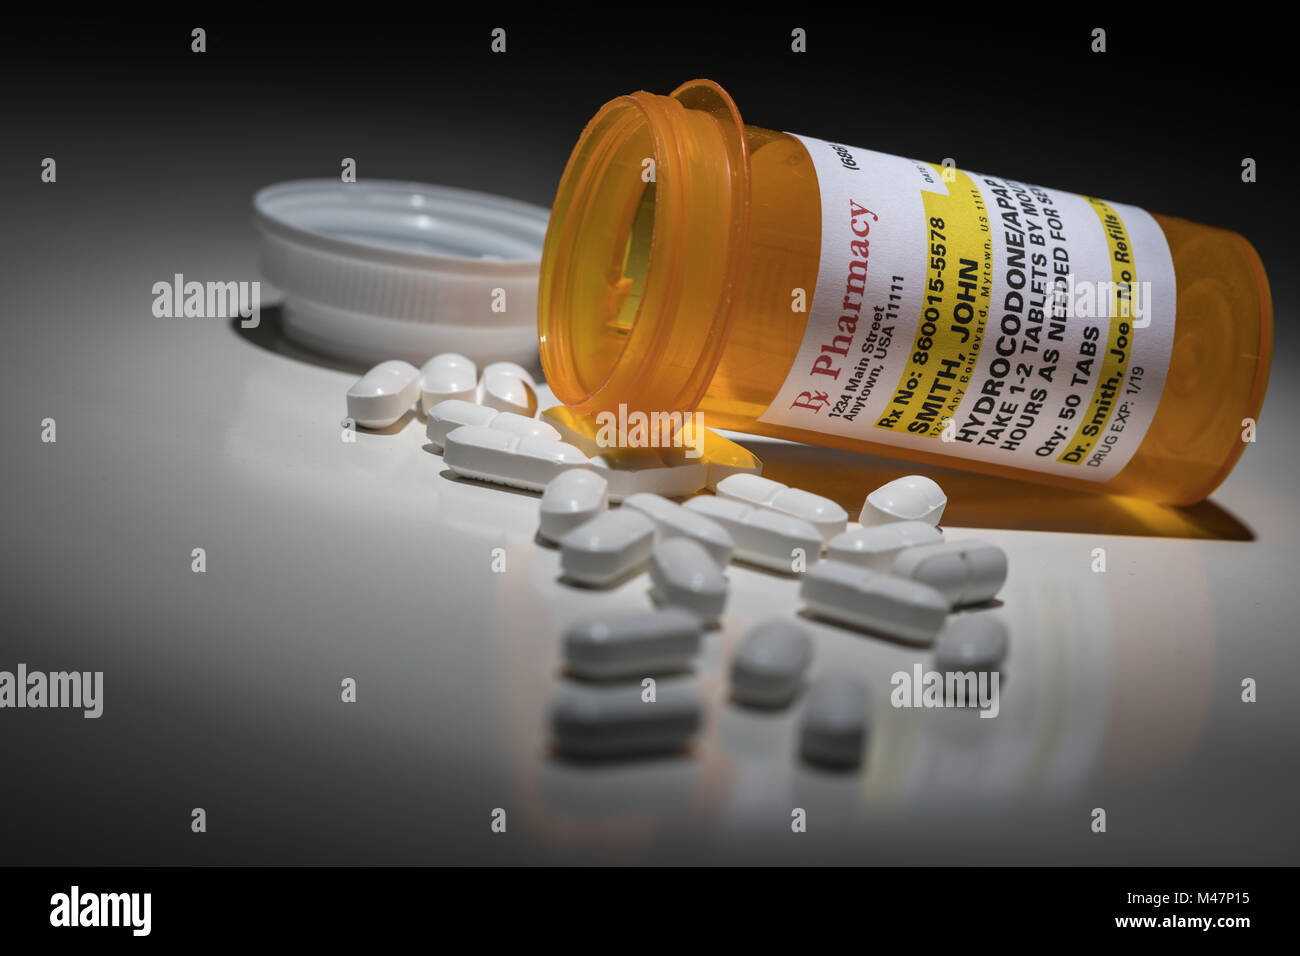 Hydrocodone Pills and Prescription Bottle with Non Proprietary Label. No model release required - contains ficticious information. Stock Photo